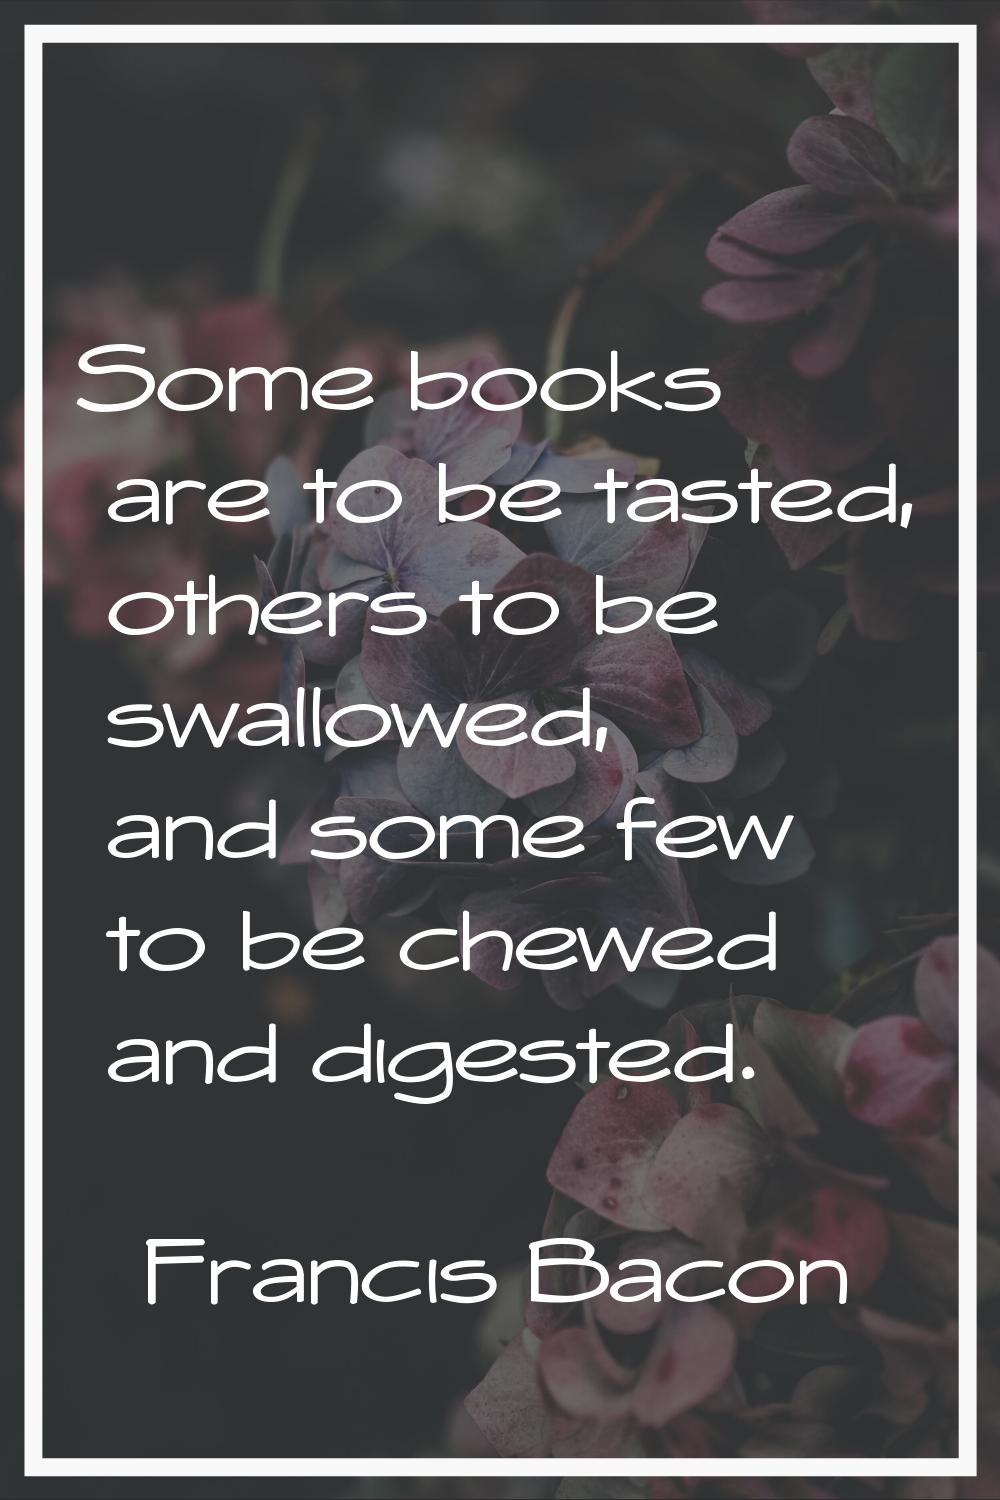 Some books are to be tasted, others to be swallowed, and some few to be chewed and digested.